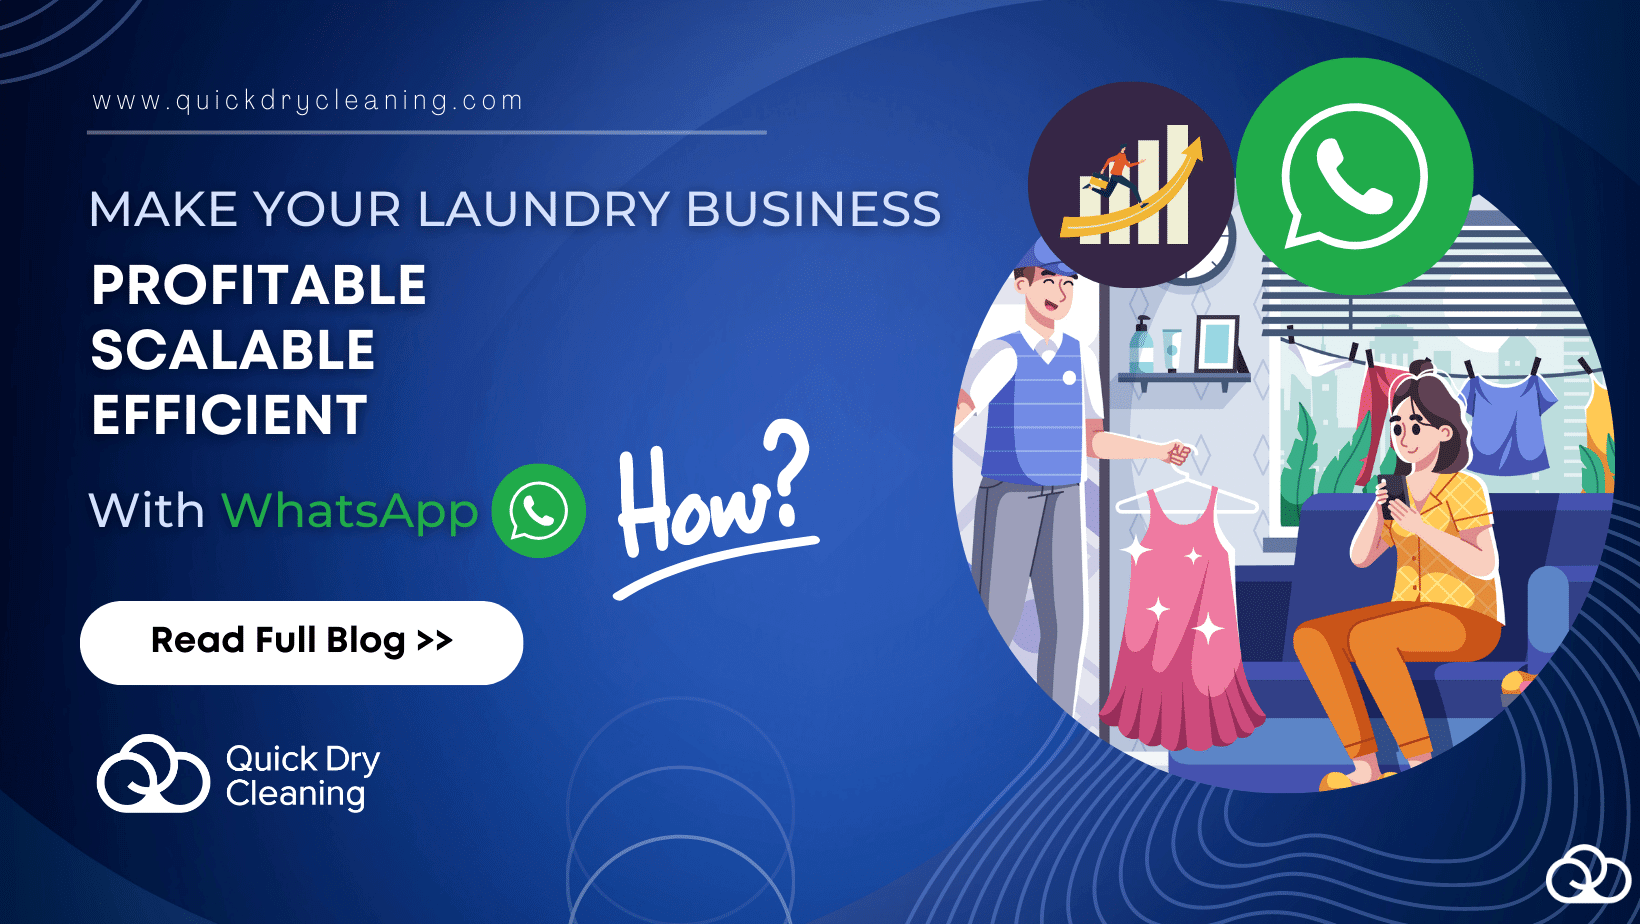 World’s First WhatsApp bot for laundry business